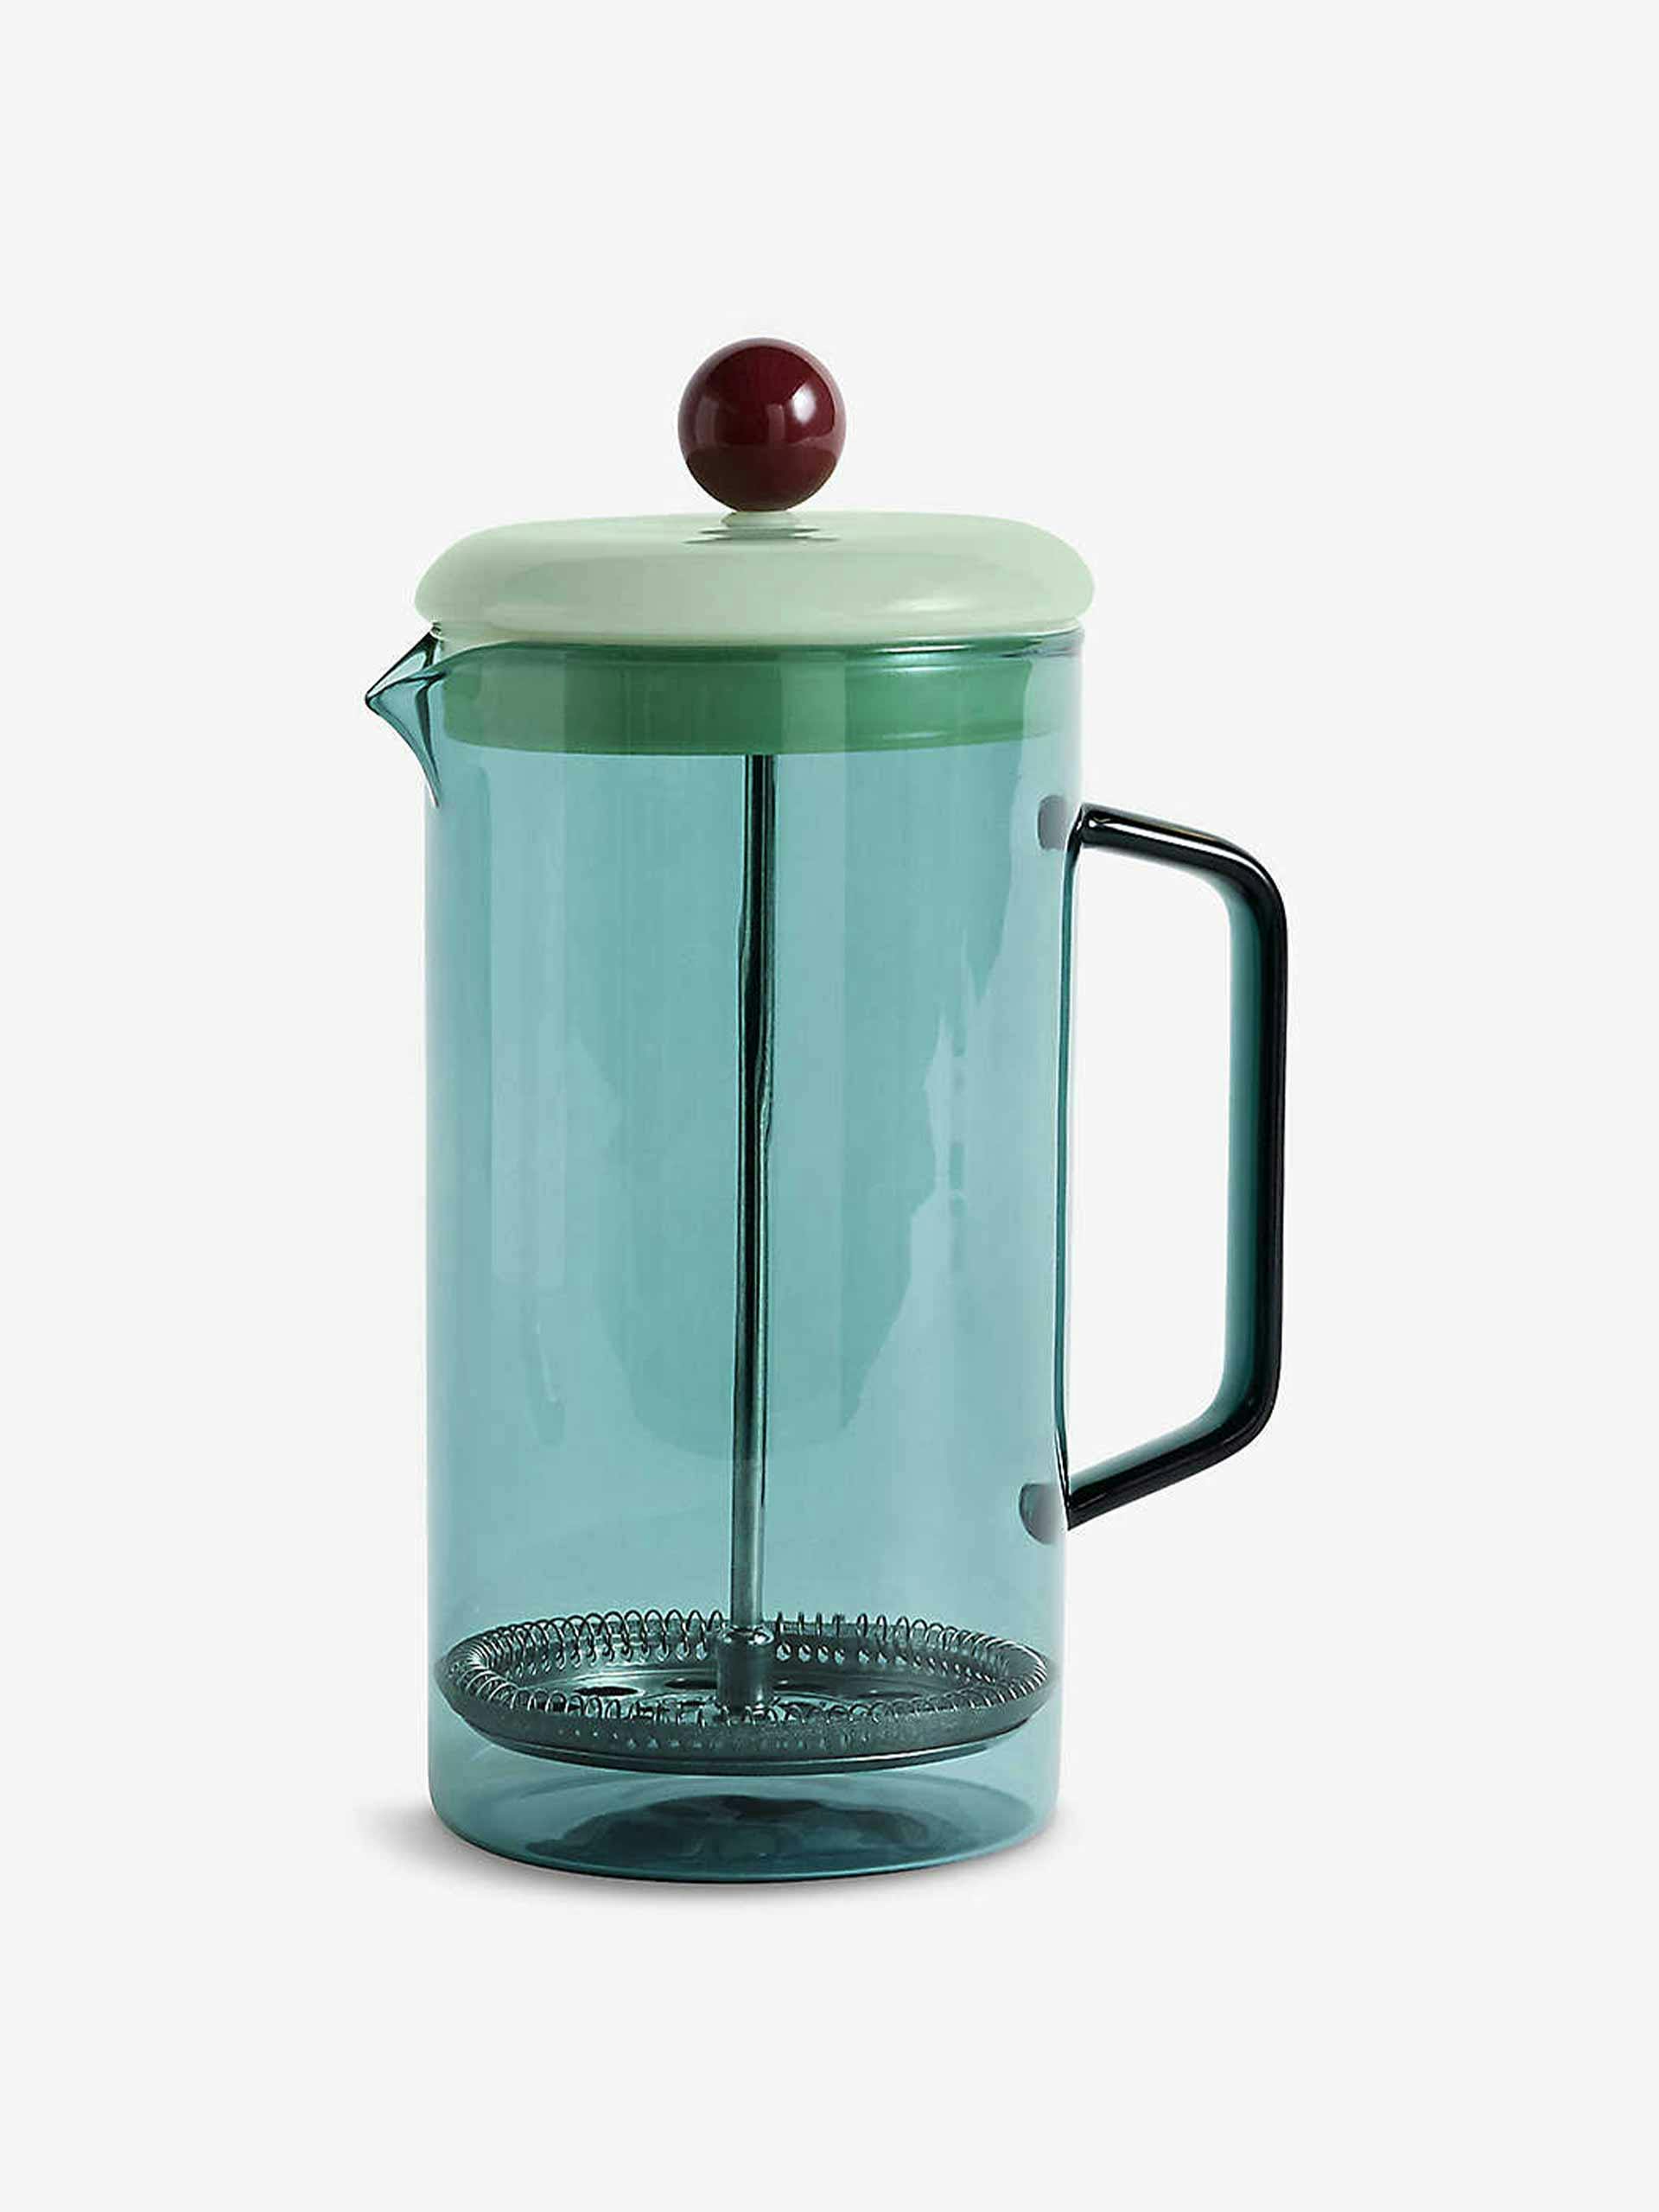 Tinted glass French press